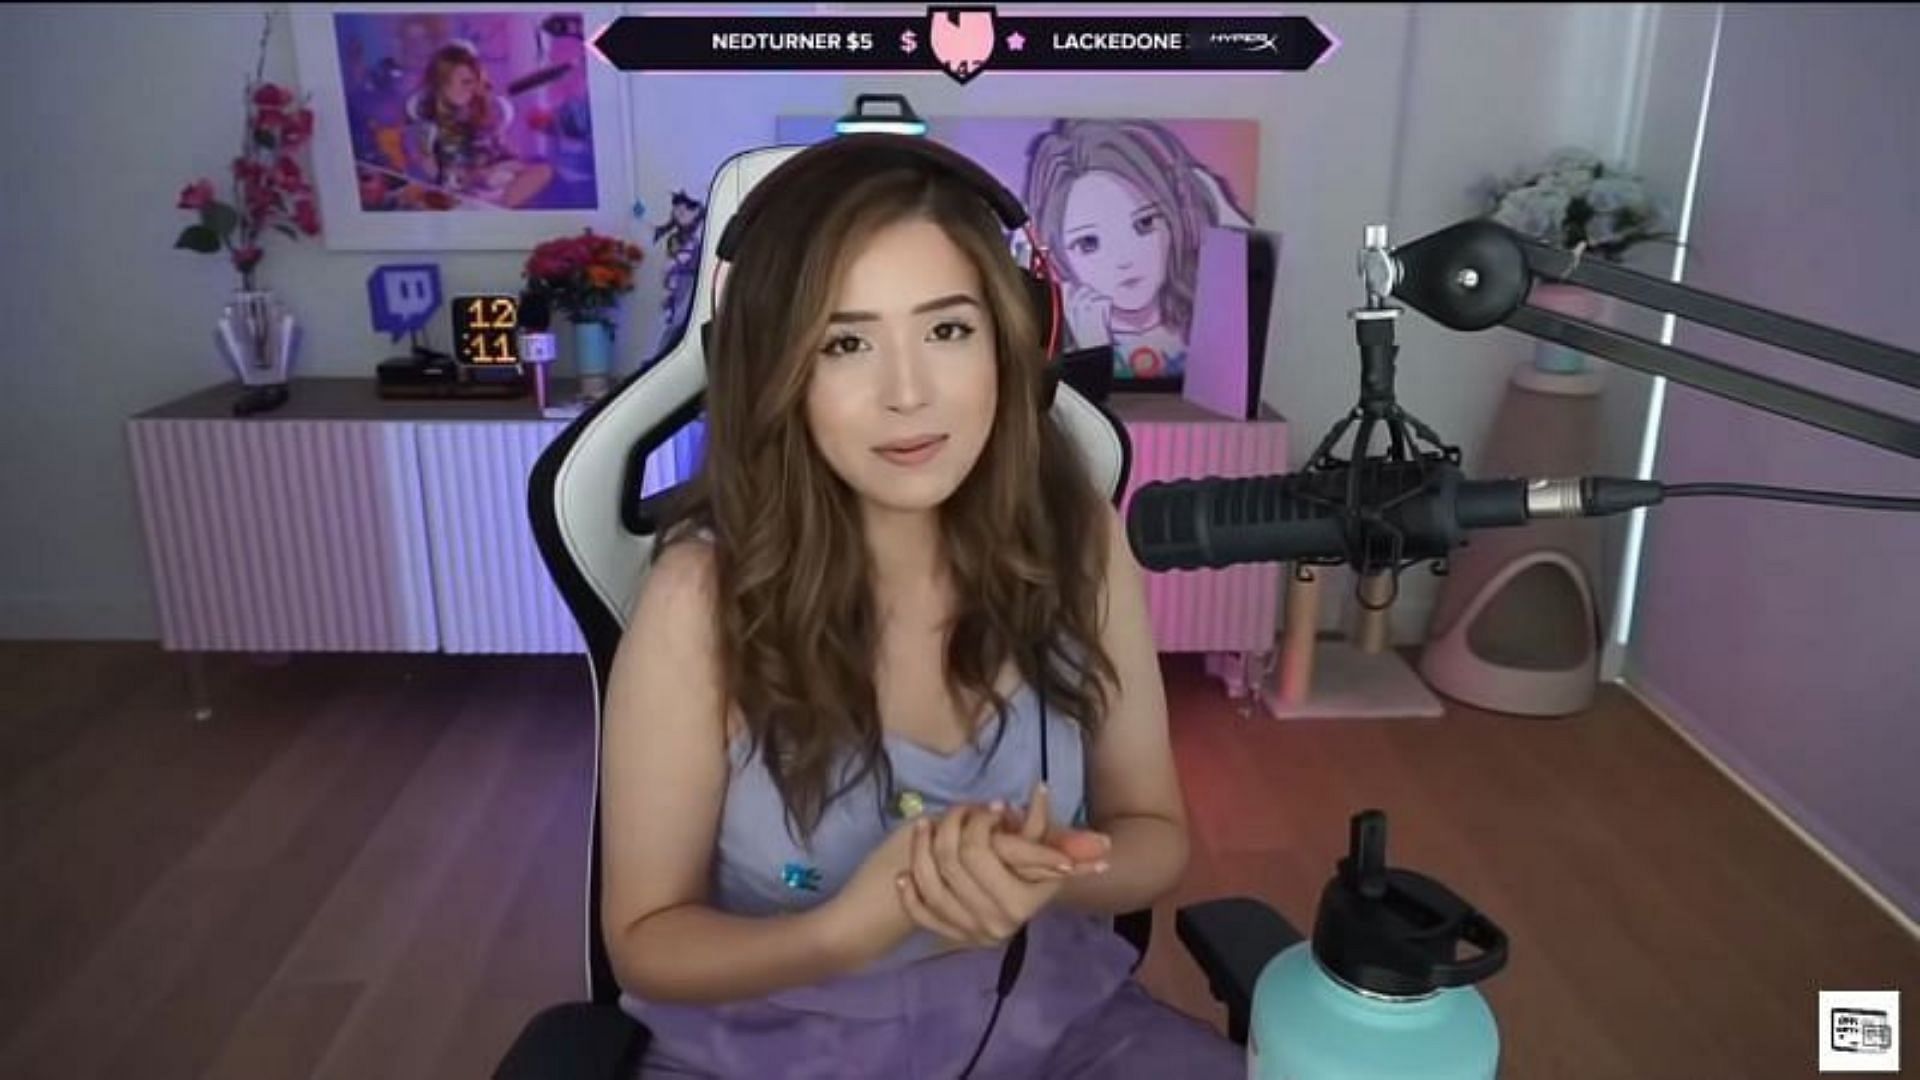 Pokimane fans are perplexed by the baby fever she is exhibiting (Image via Pokimane/Twitch)